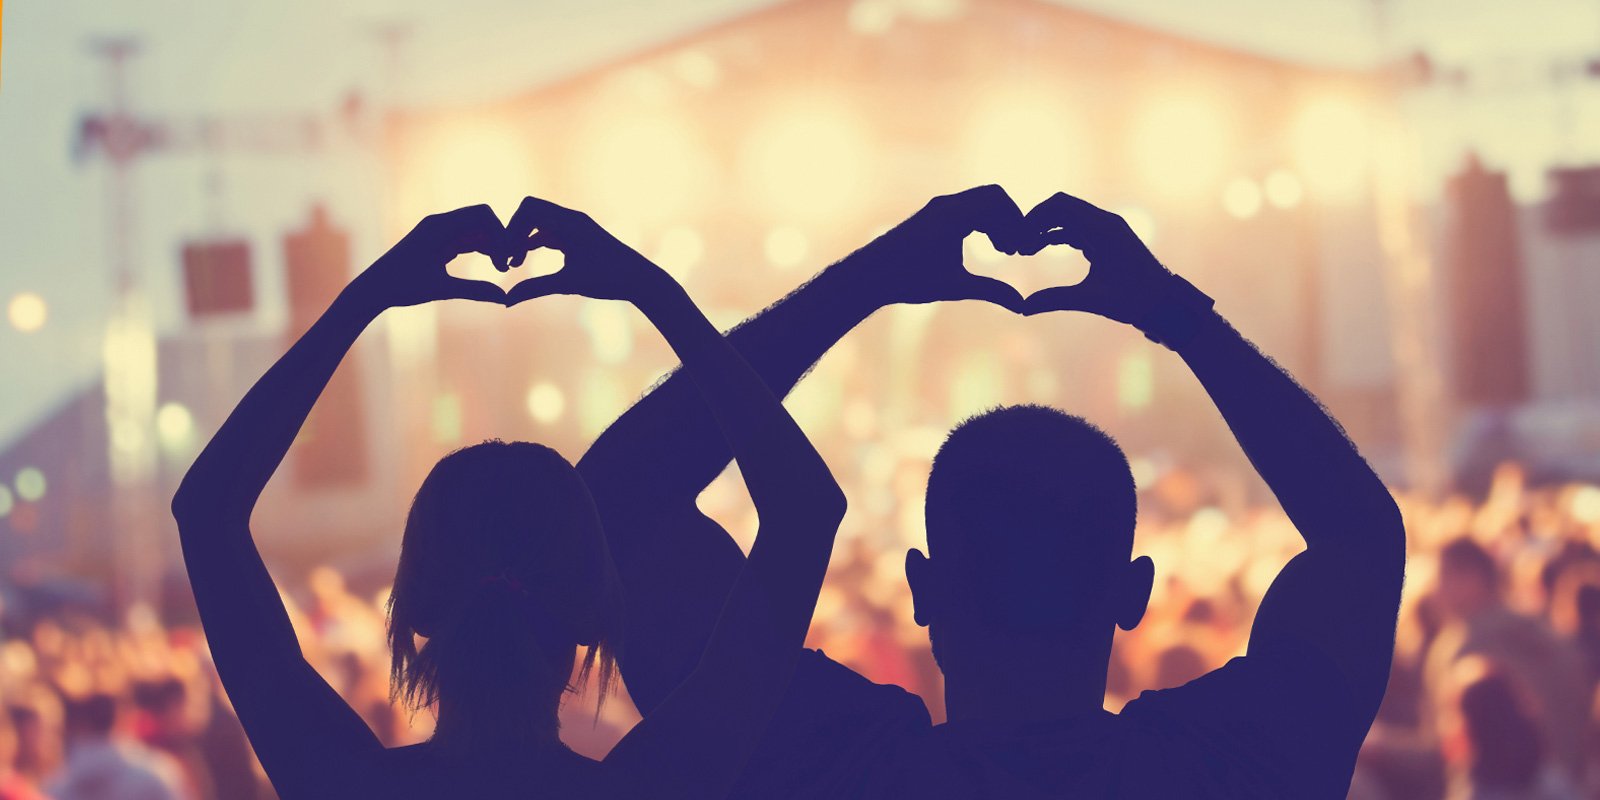 Silhouette of two people at a music festival making heart shapes with their hands